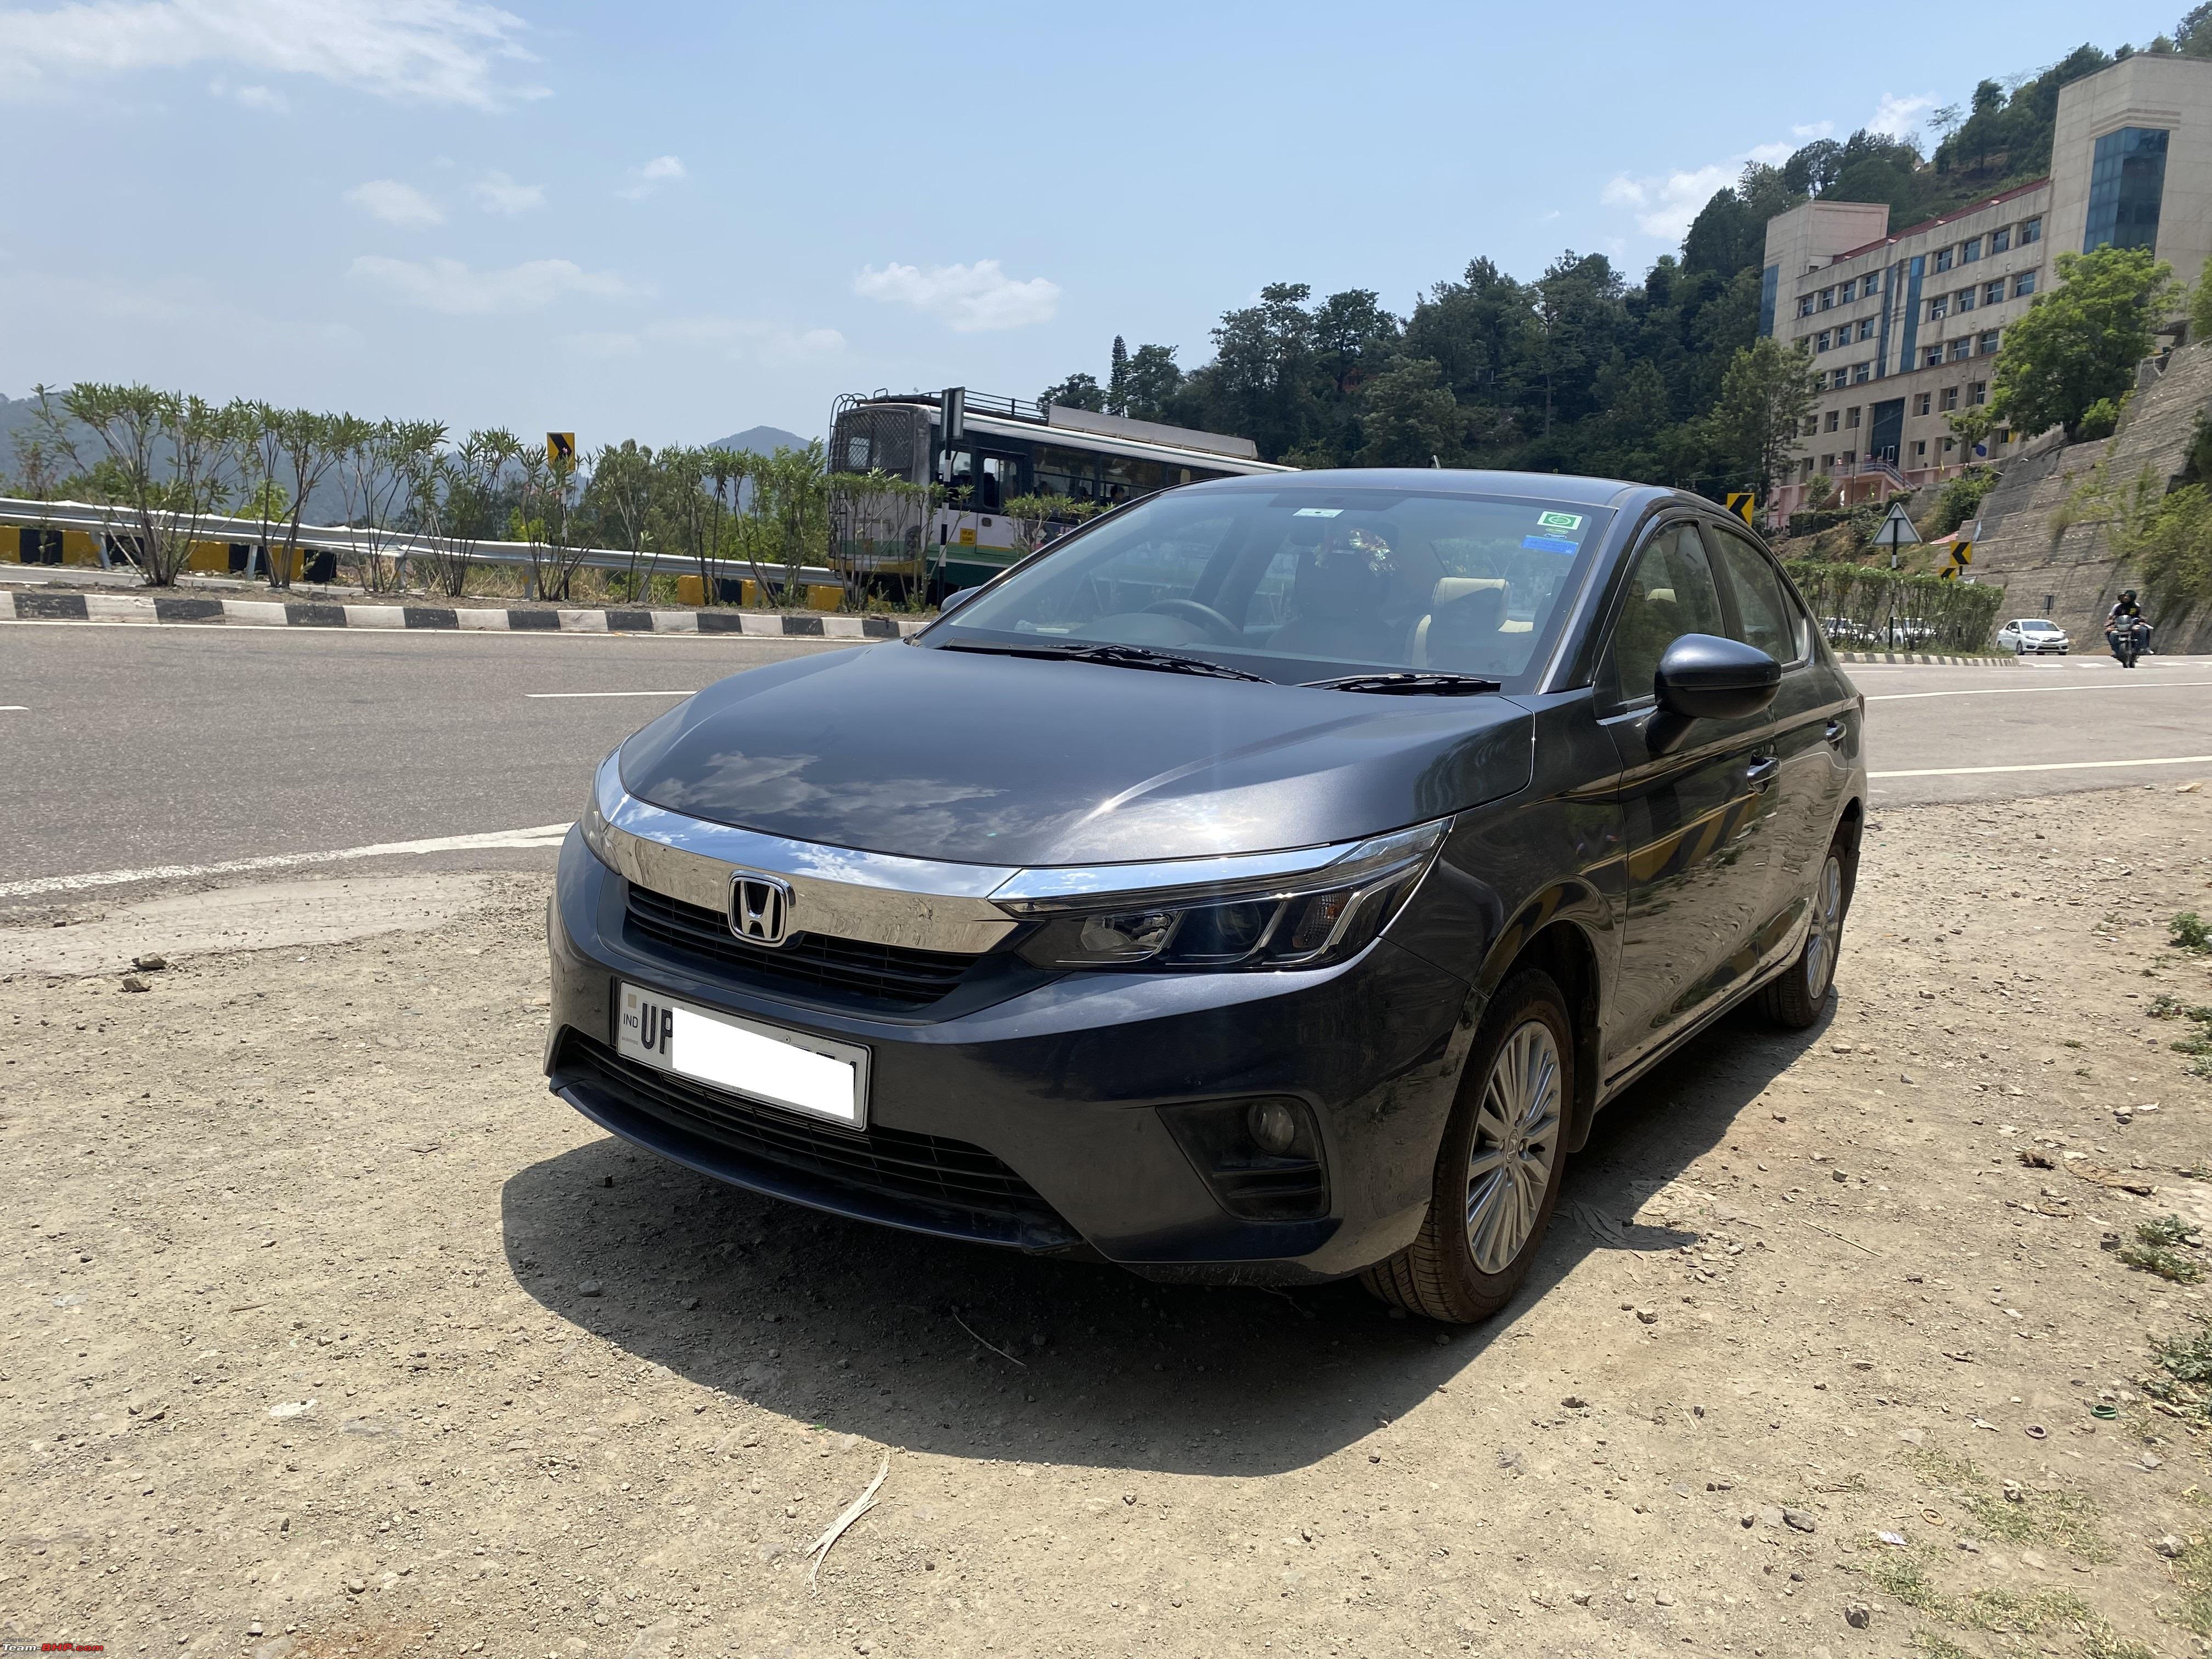 https://www.team-bhp.com/forum/attachments/test-drives-initial-ownership-reports/2334799d1657964460-king-midsize-sedans-honda-city-5th-gen-initial-ownership-review-img_5314.jpg